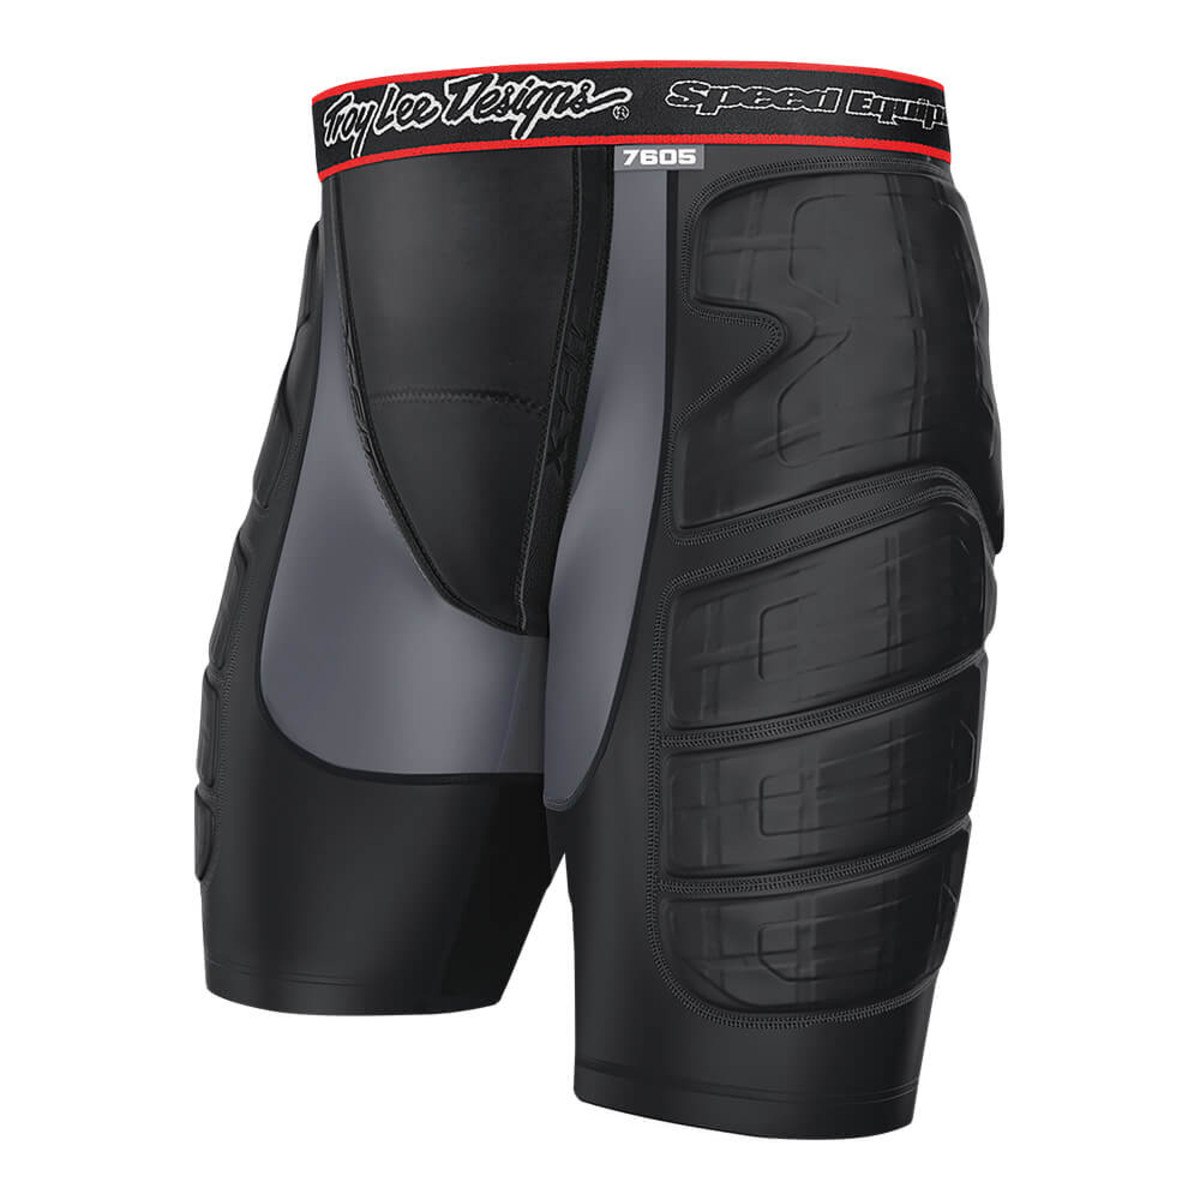 Picture of Troy Lee Designs LPS 7605 Lower Protection Shorts - Black